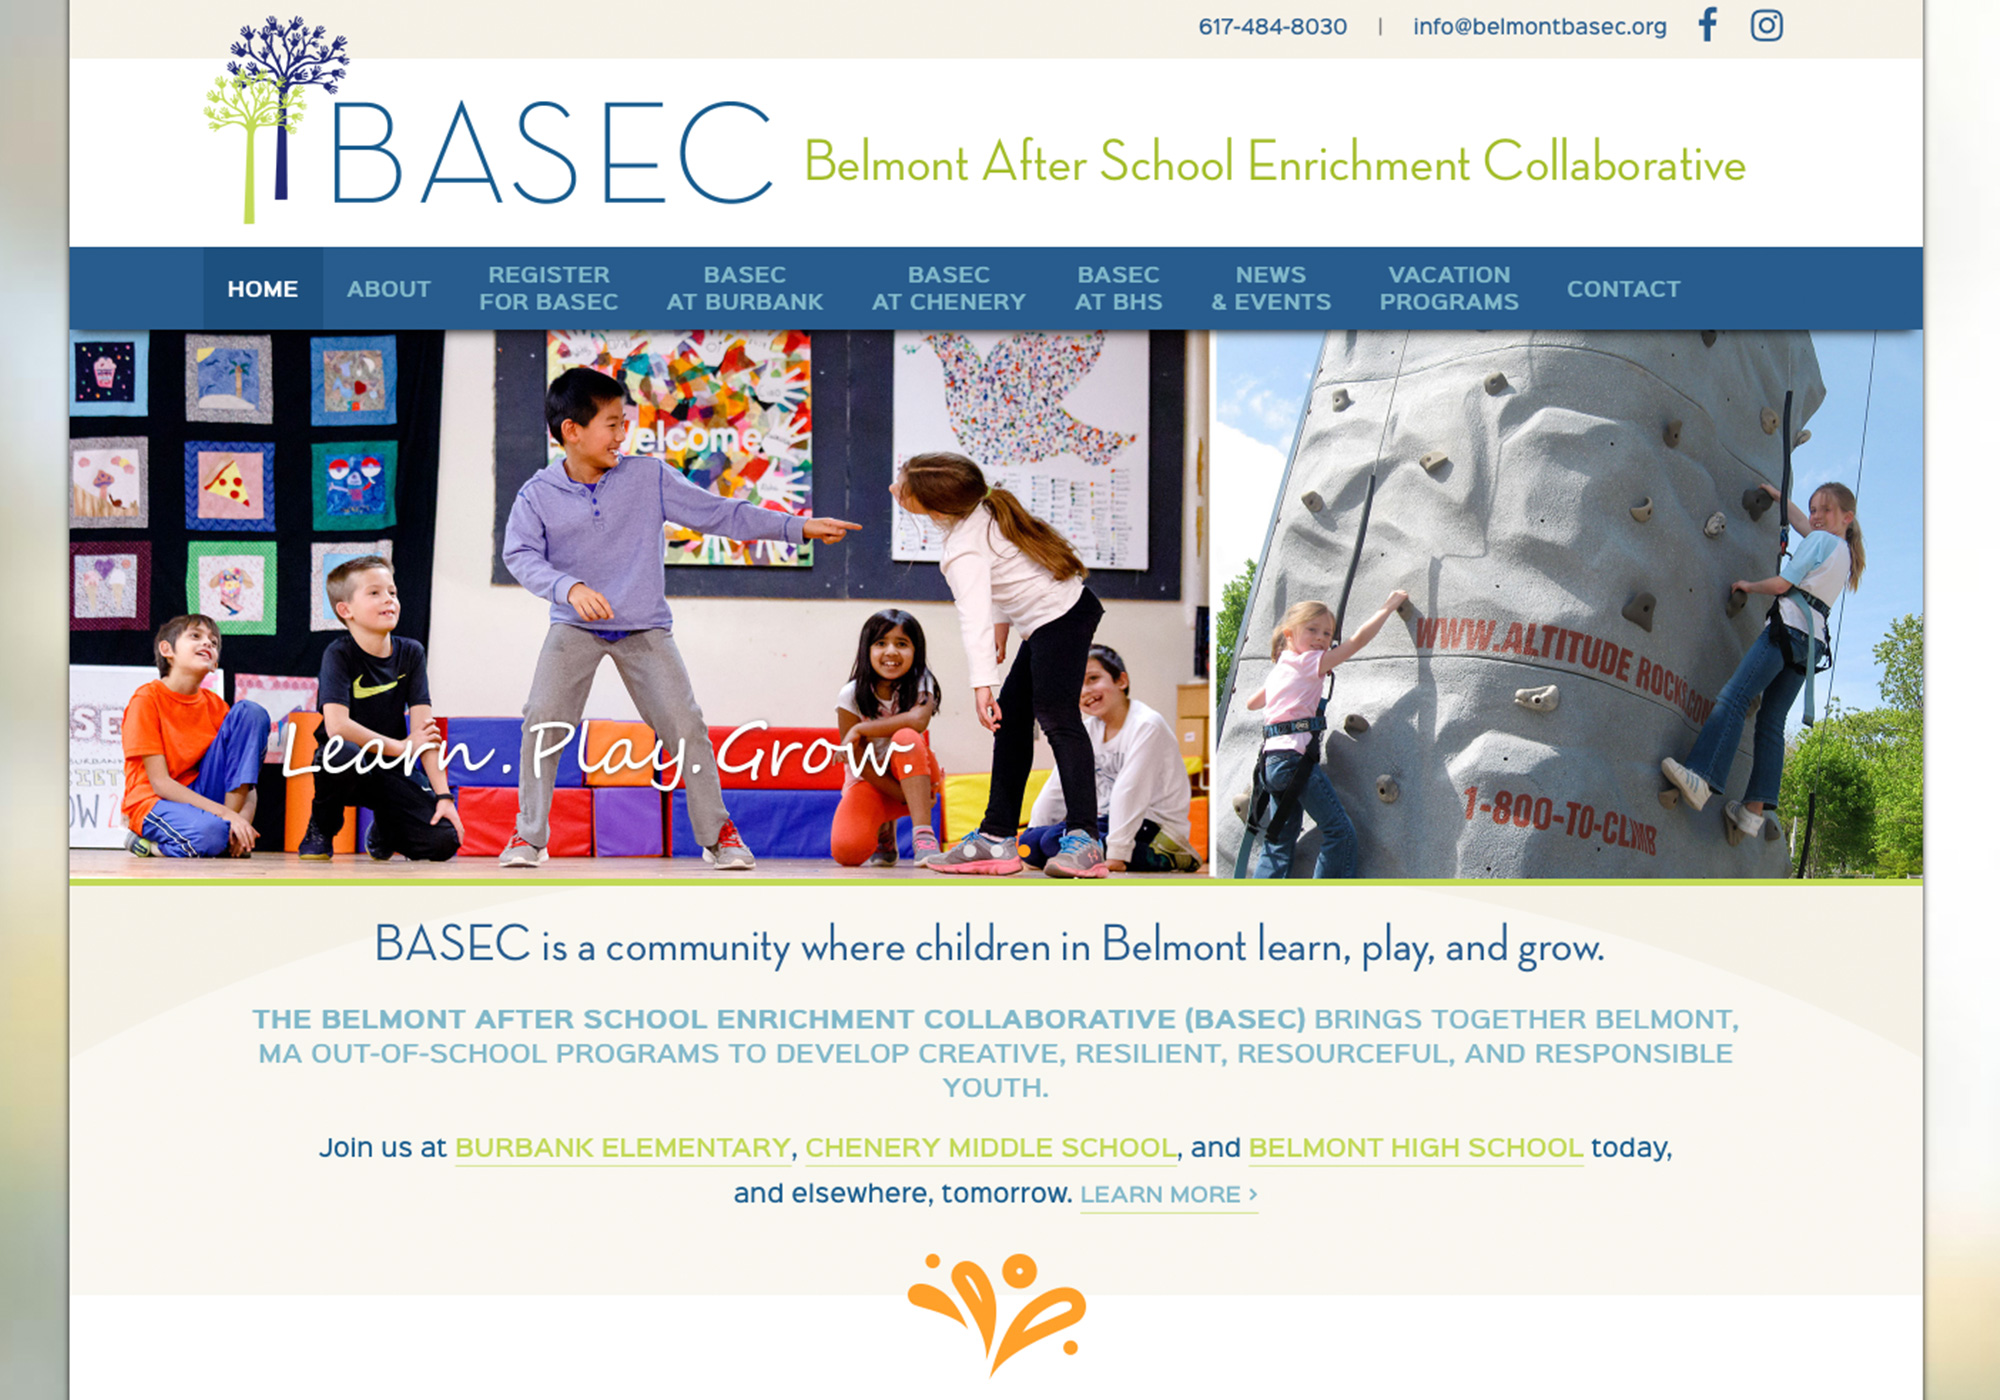 A screenshot of the SlickFish Studios designed and developed website for the Belmont After School Enrichment Collaborative.